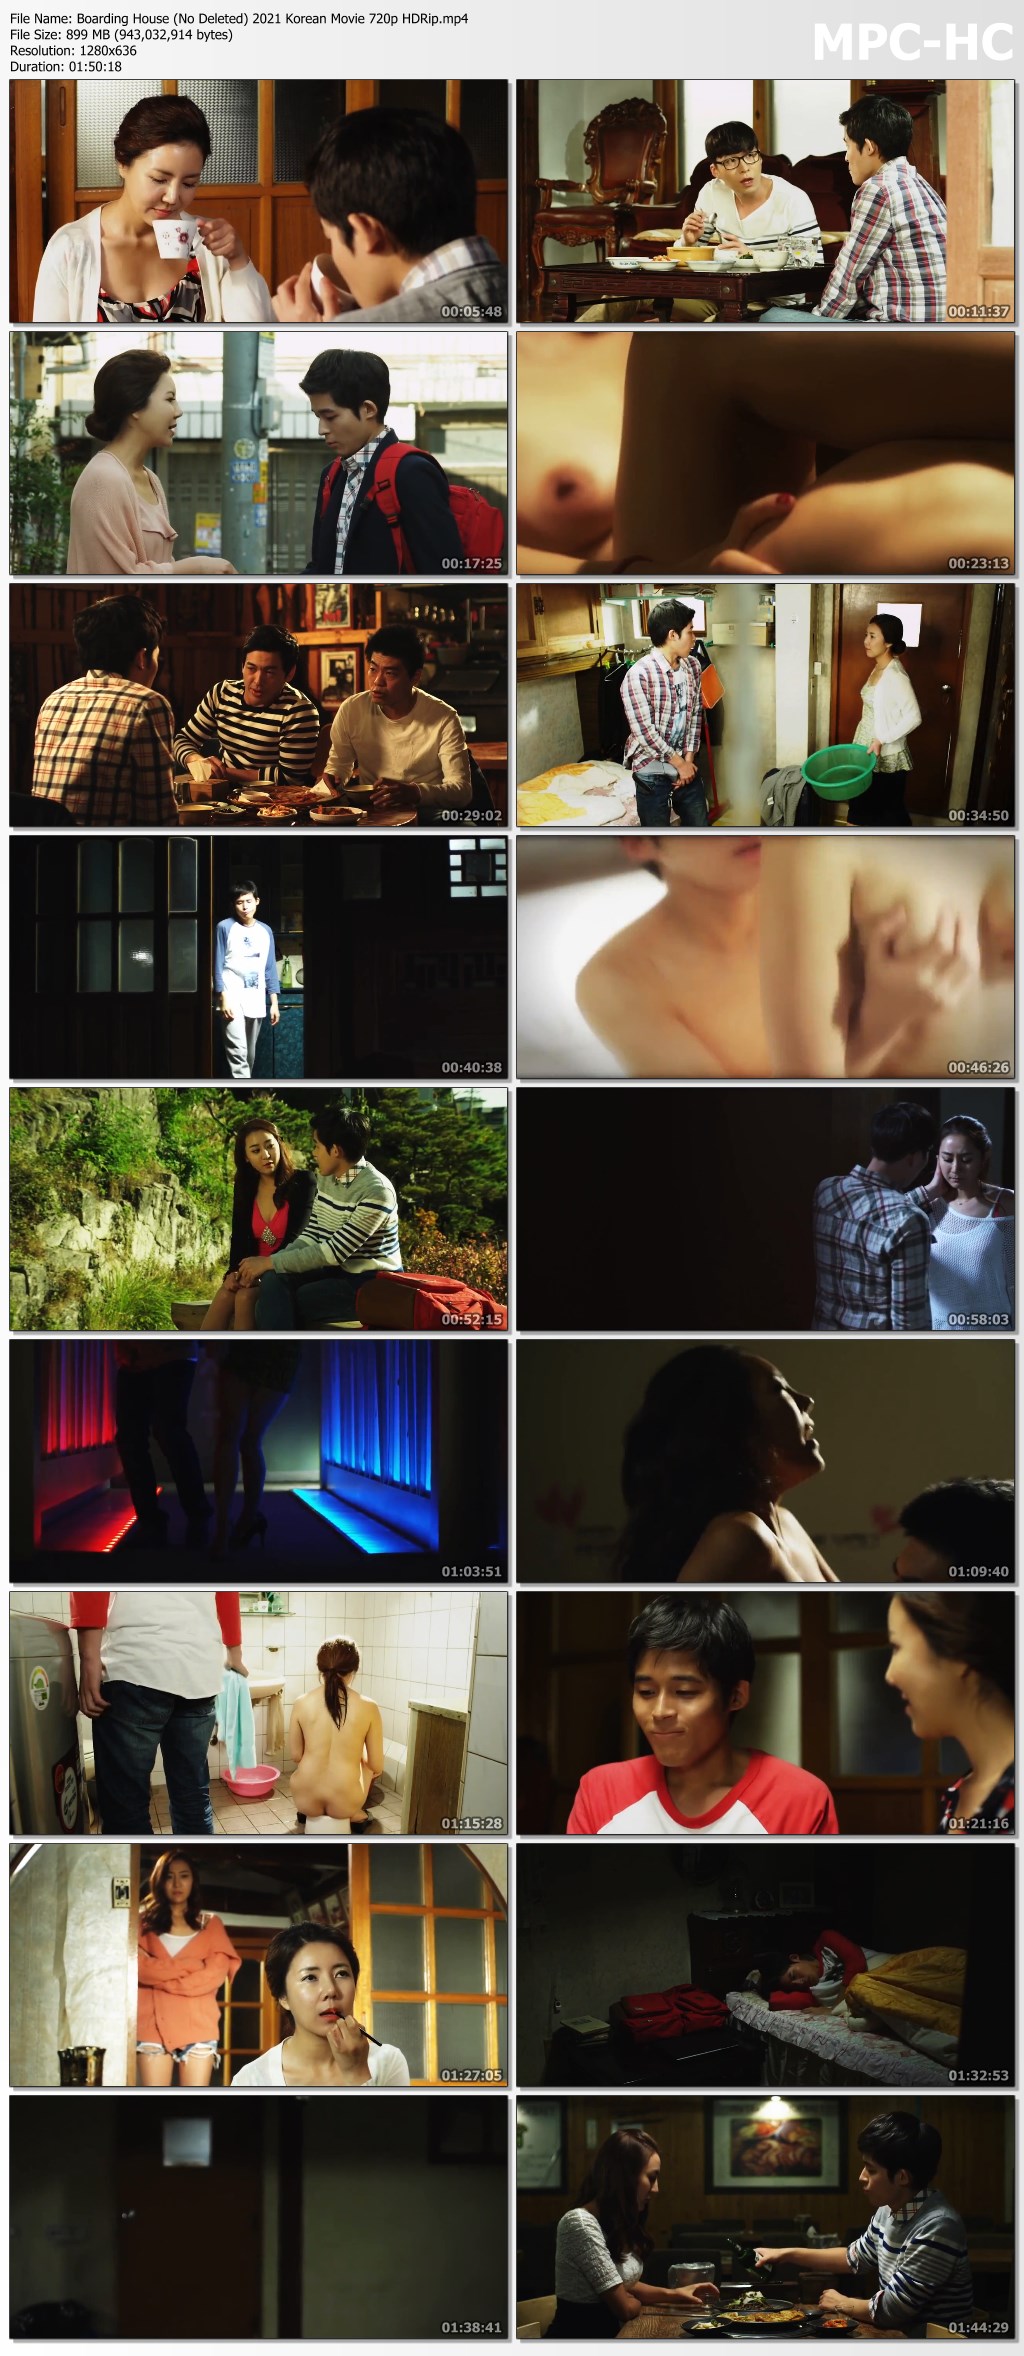 Boarding House (No Deleted) 2021 Korean Movie 720p HDRip.mp4 thumbs